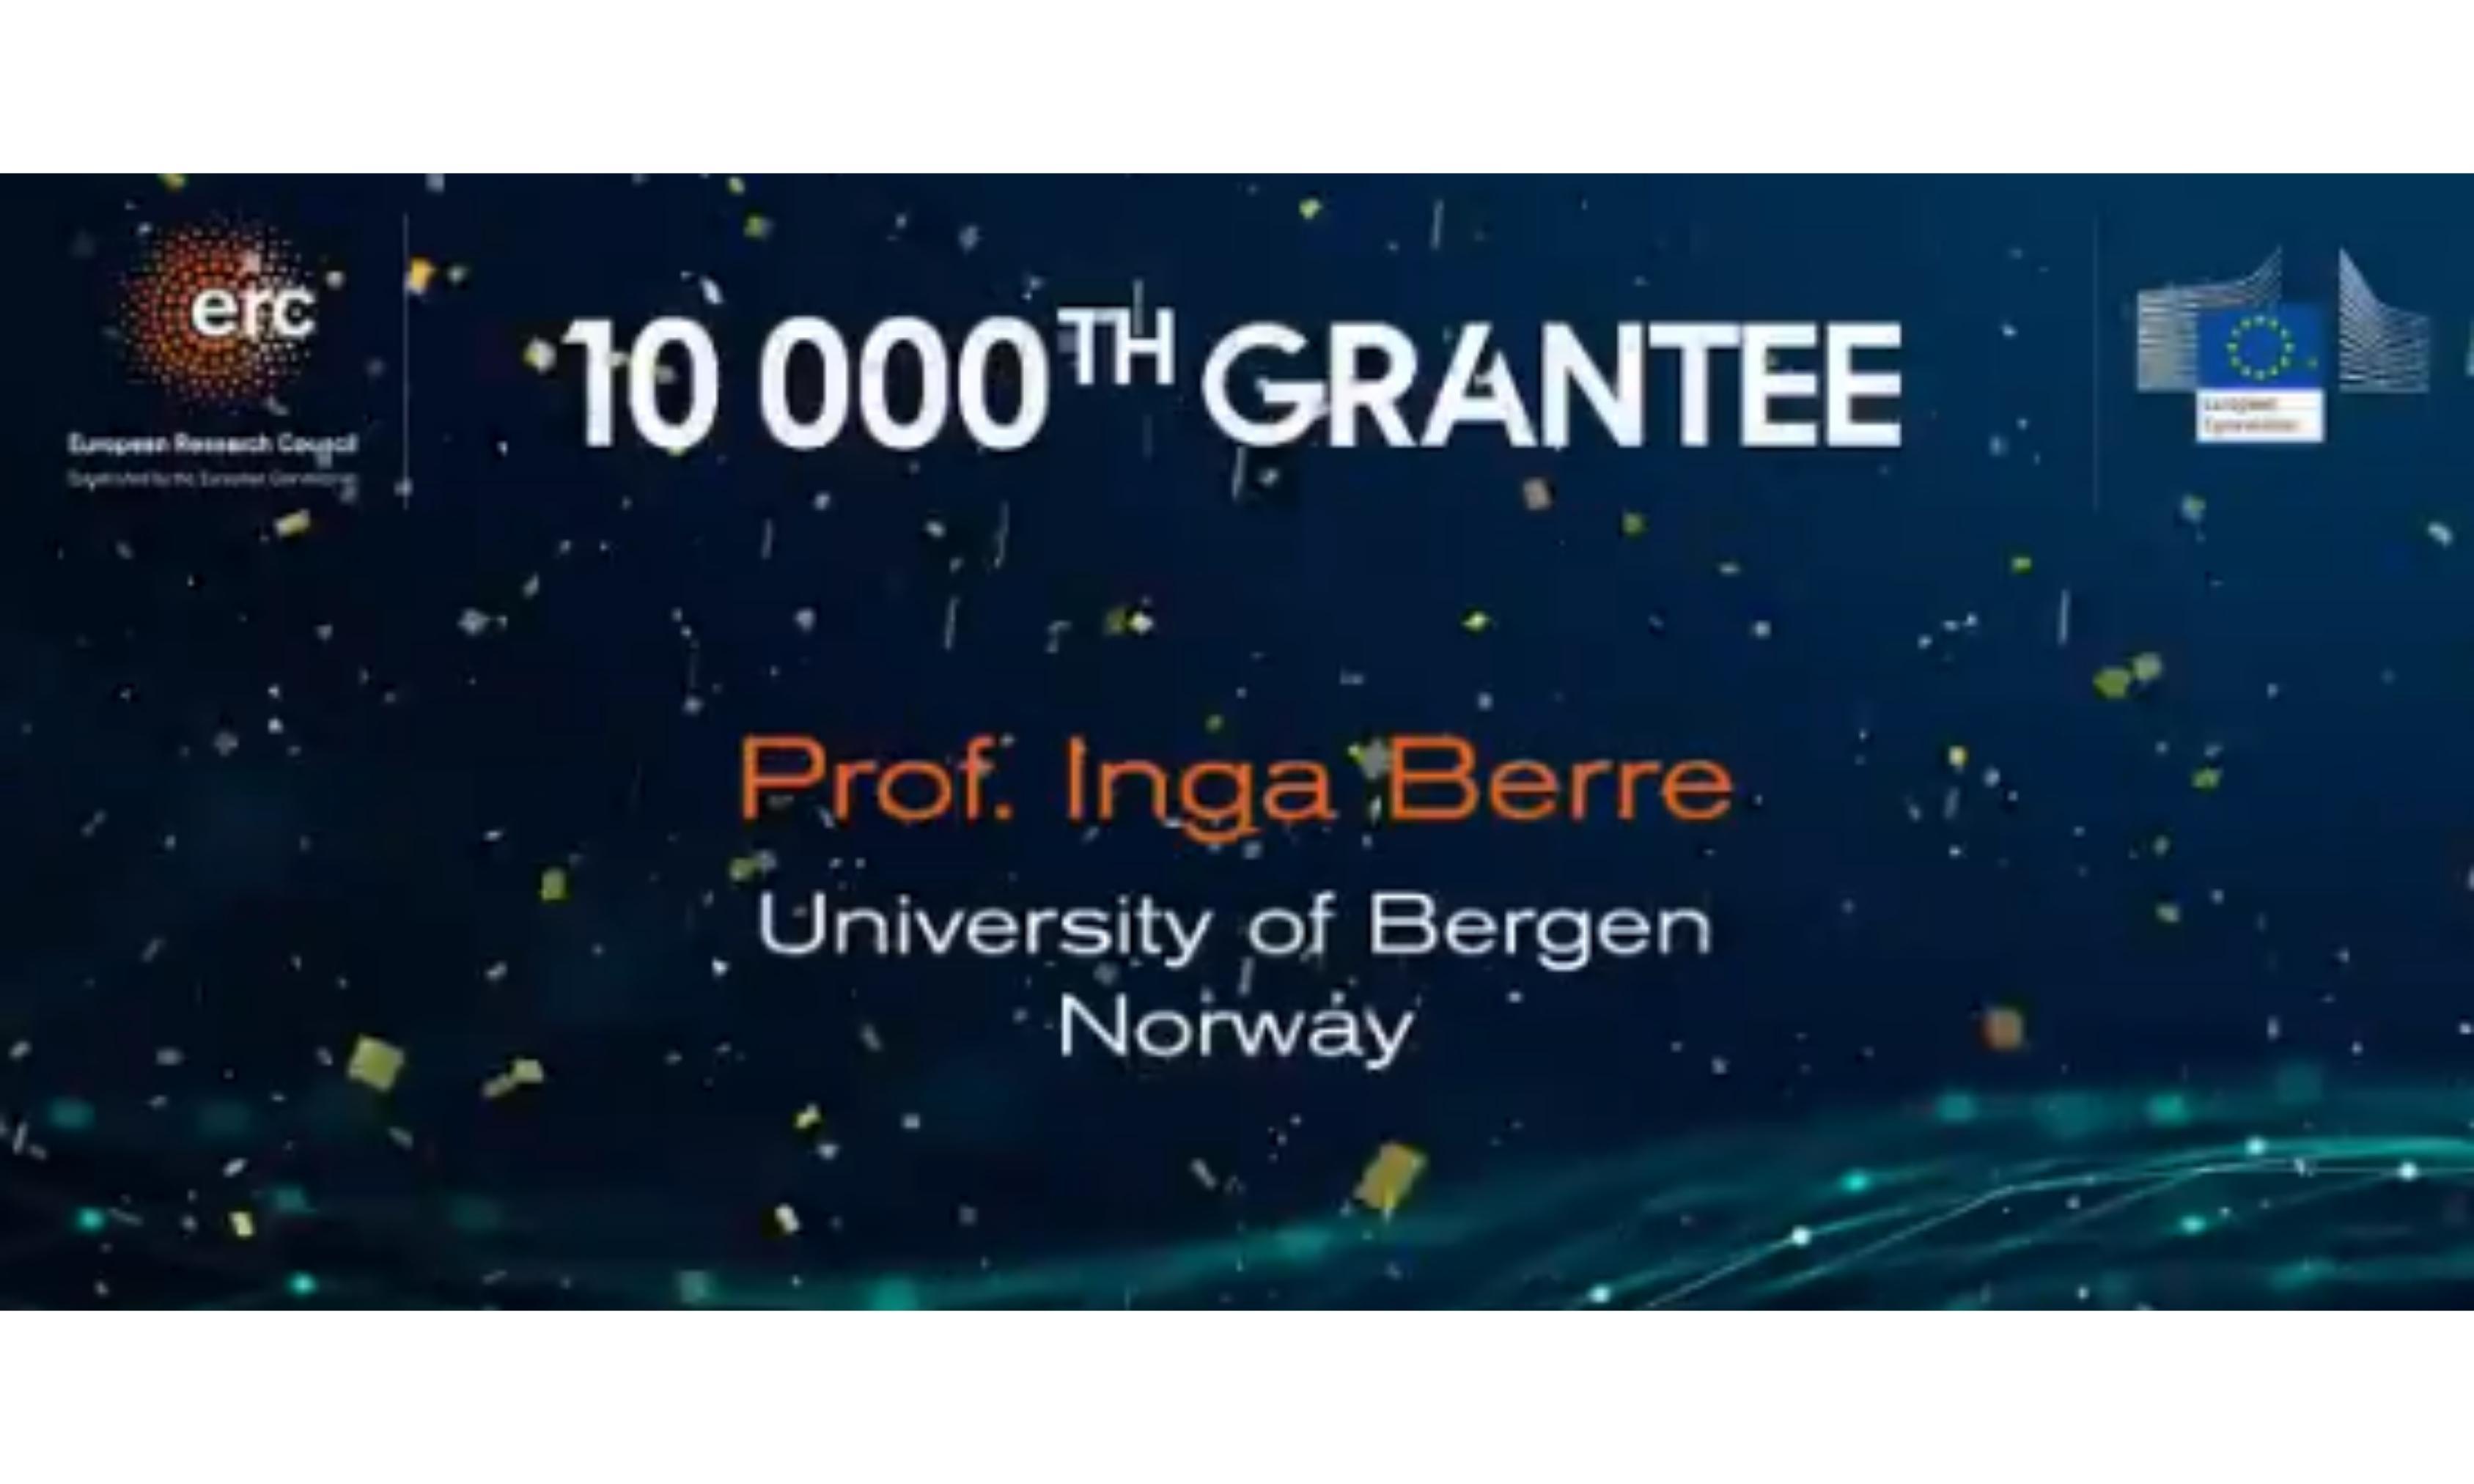 Cover image of European Research Council funds 10 000th researcher